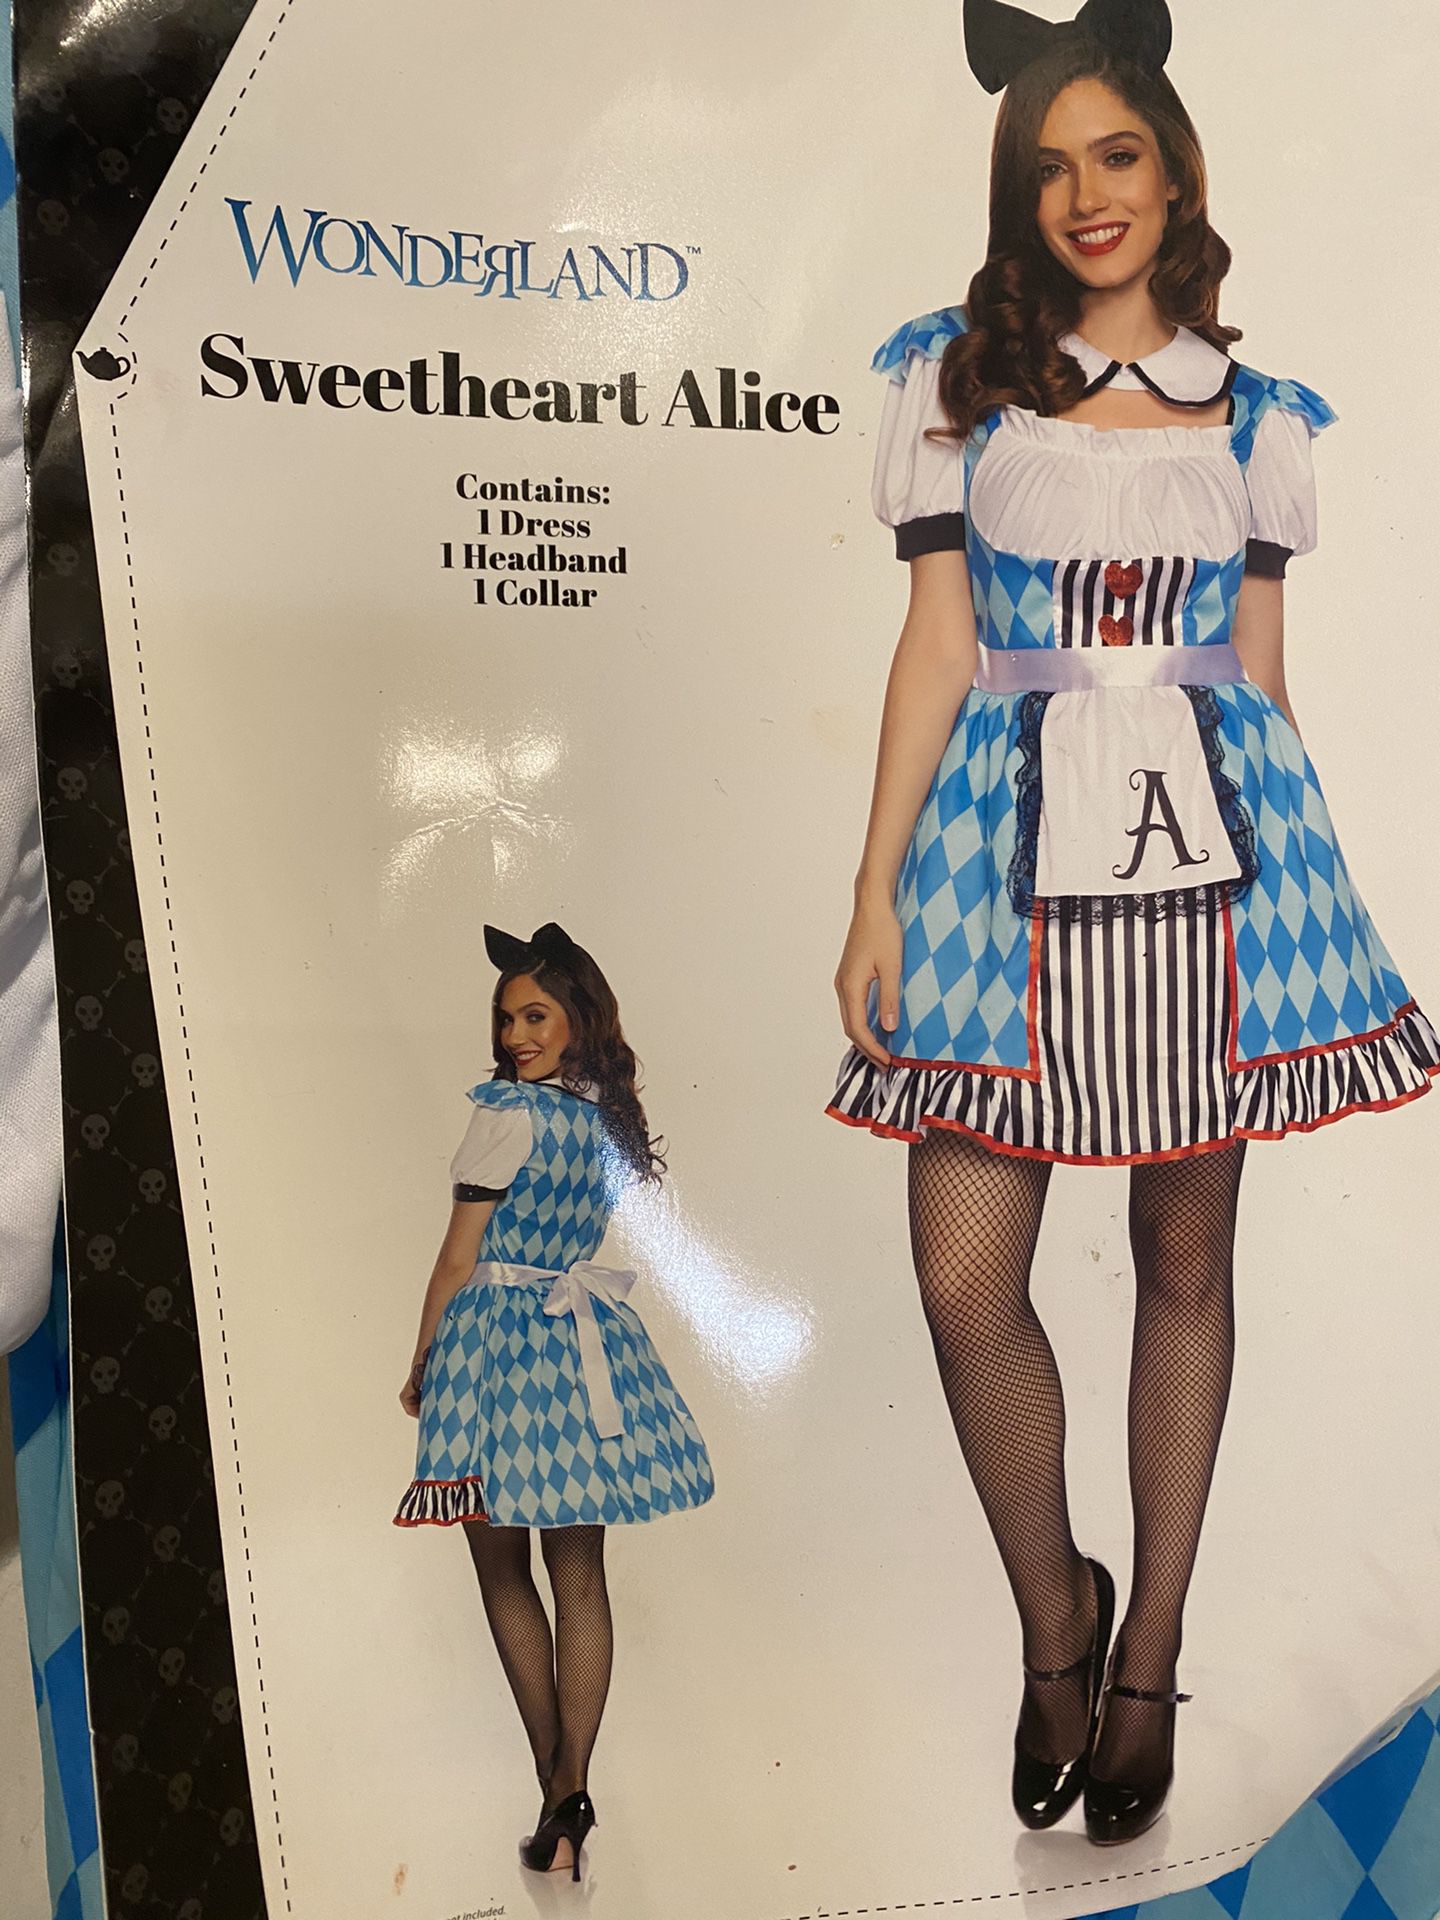 Selling a new Woman’s costume